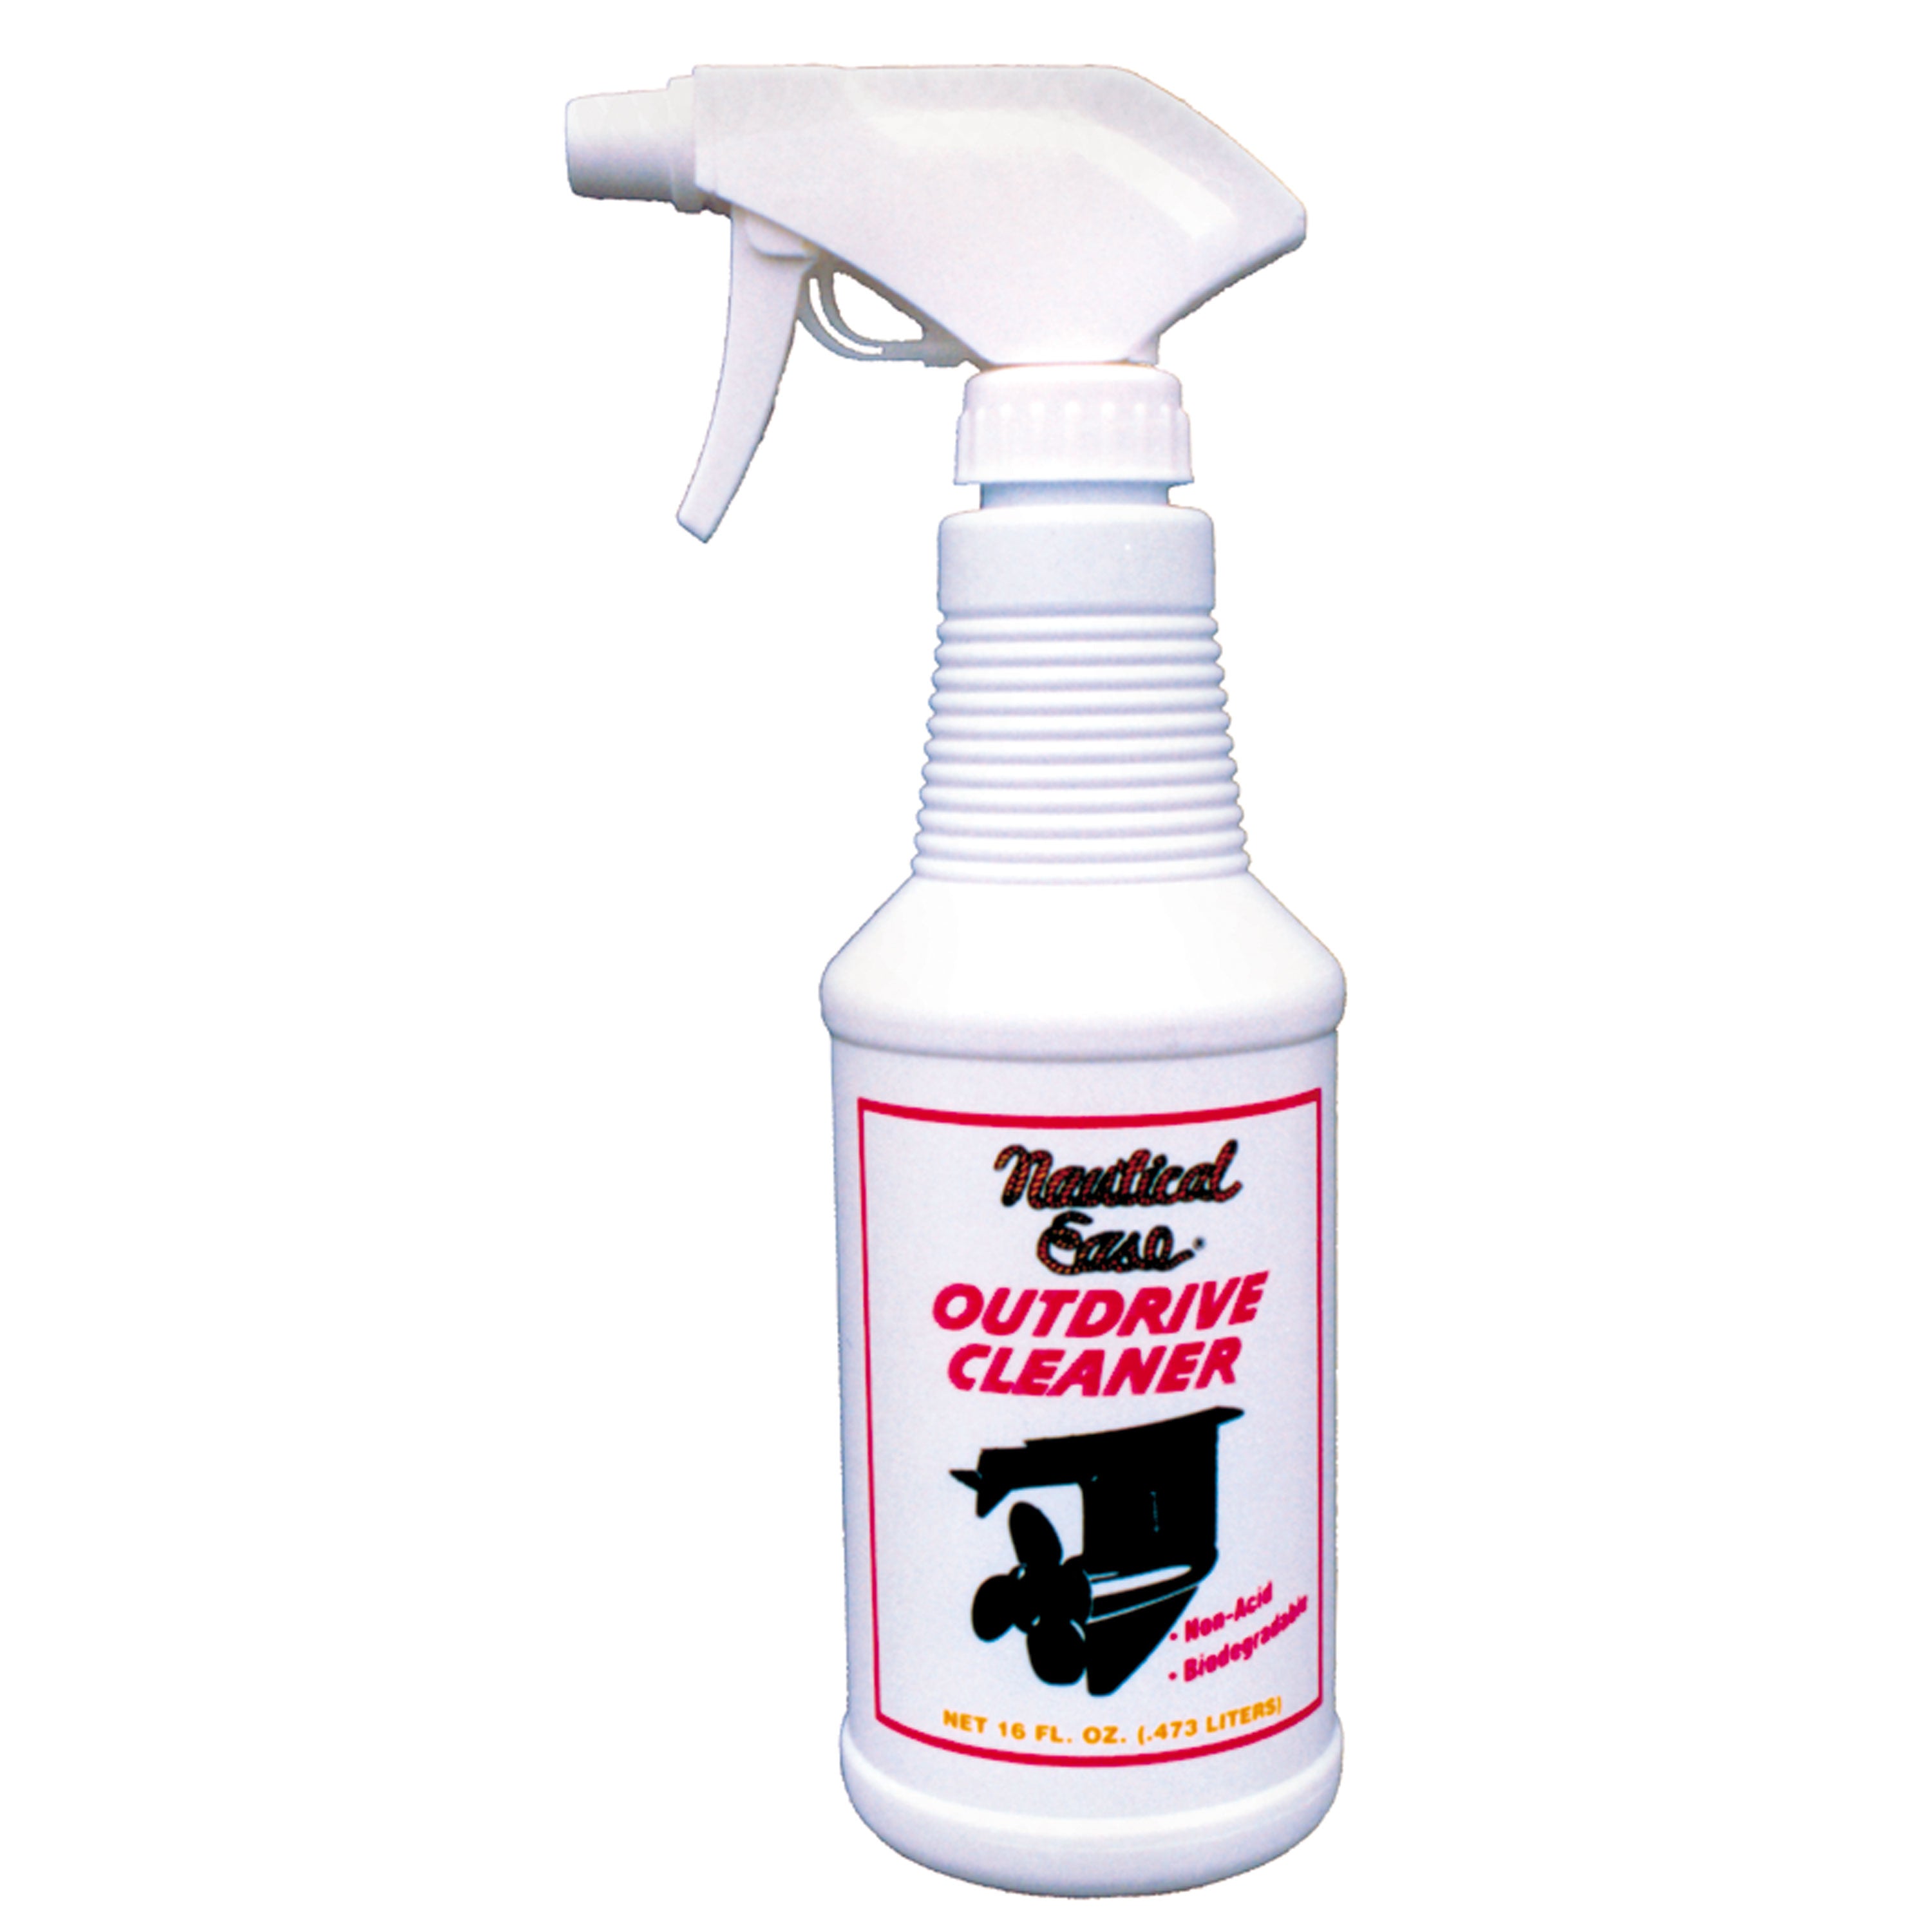 Nautical NEOD-20P Ease Super-Duty Outdrive Cleaner - Pint